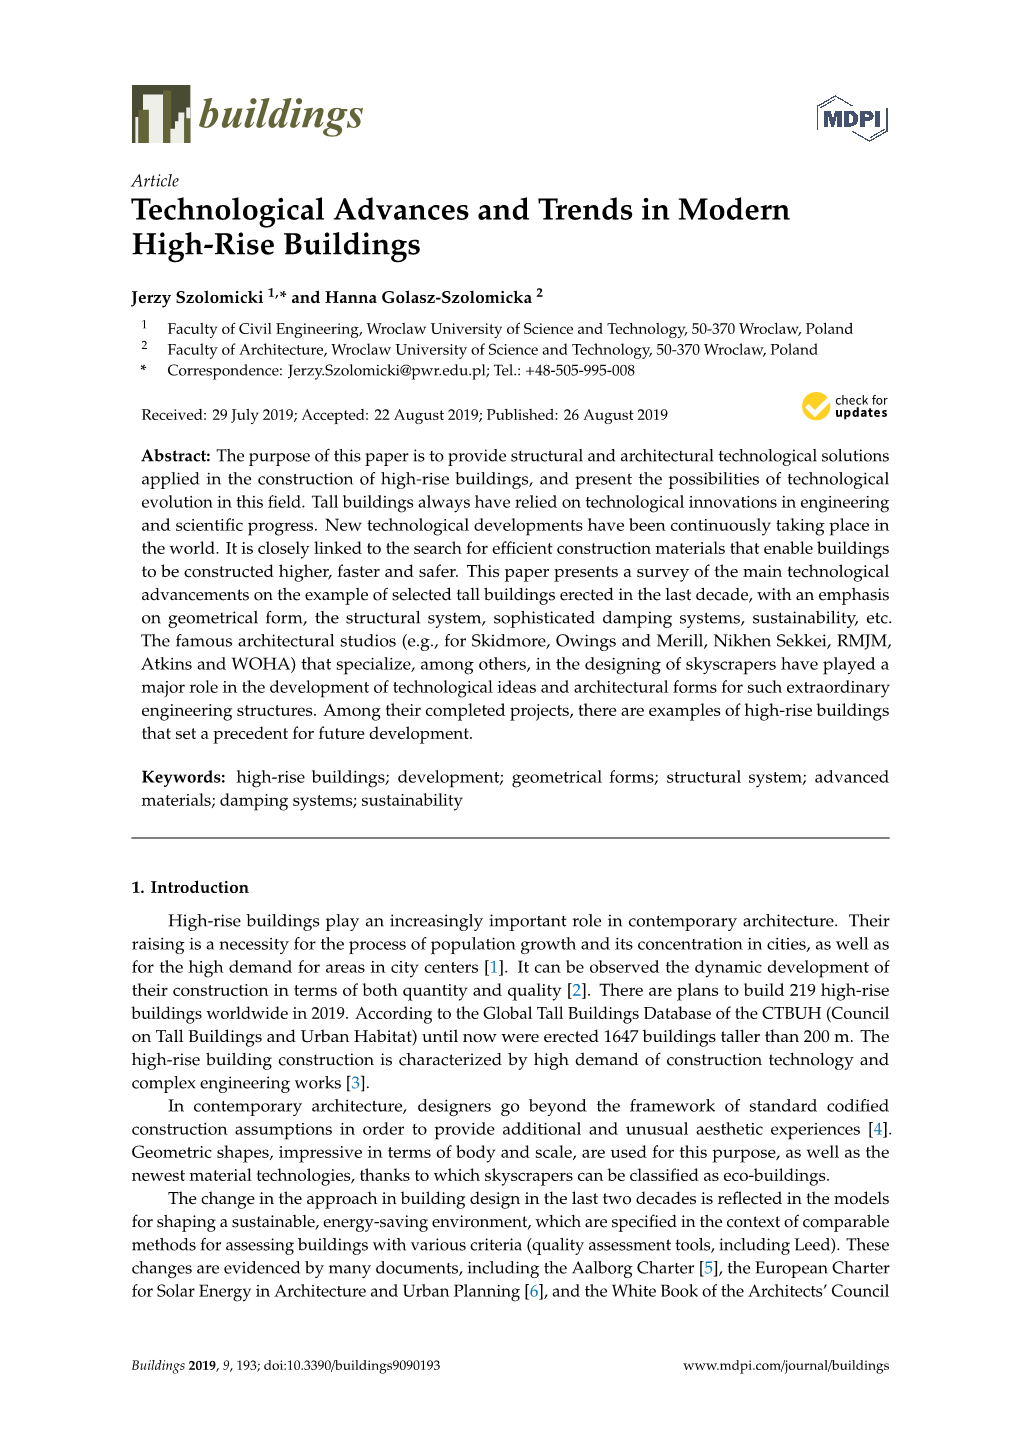 Technological Advances and Trends in Modern High-Rise Buildings